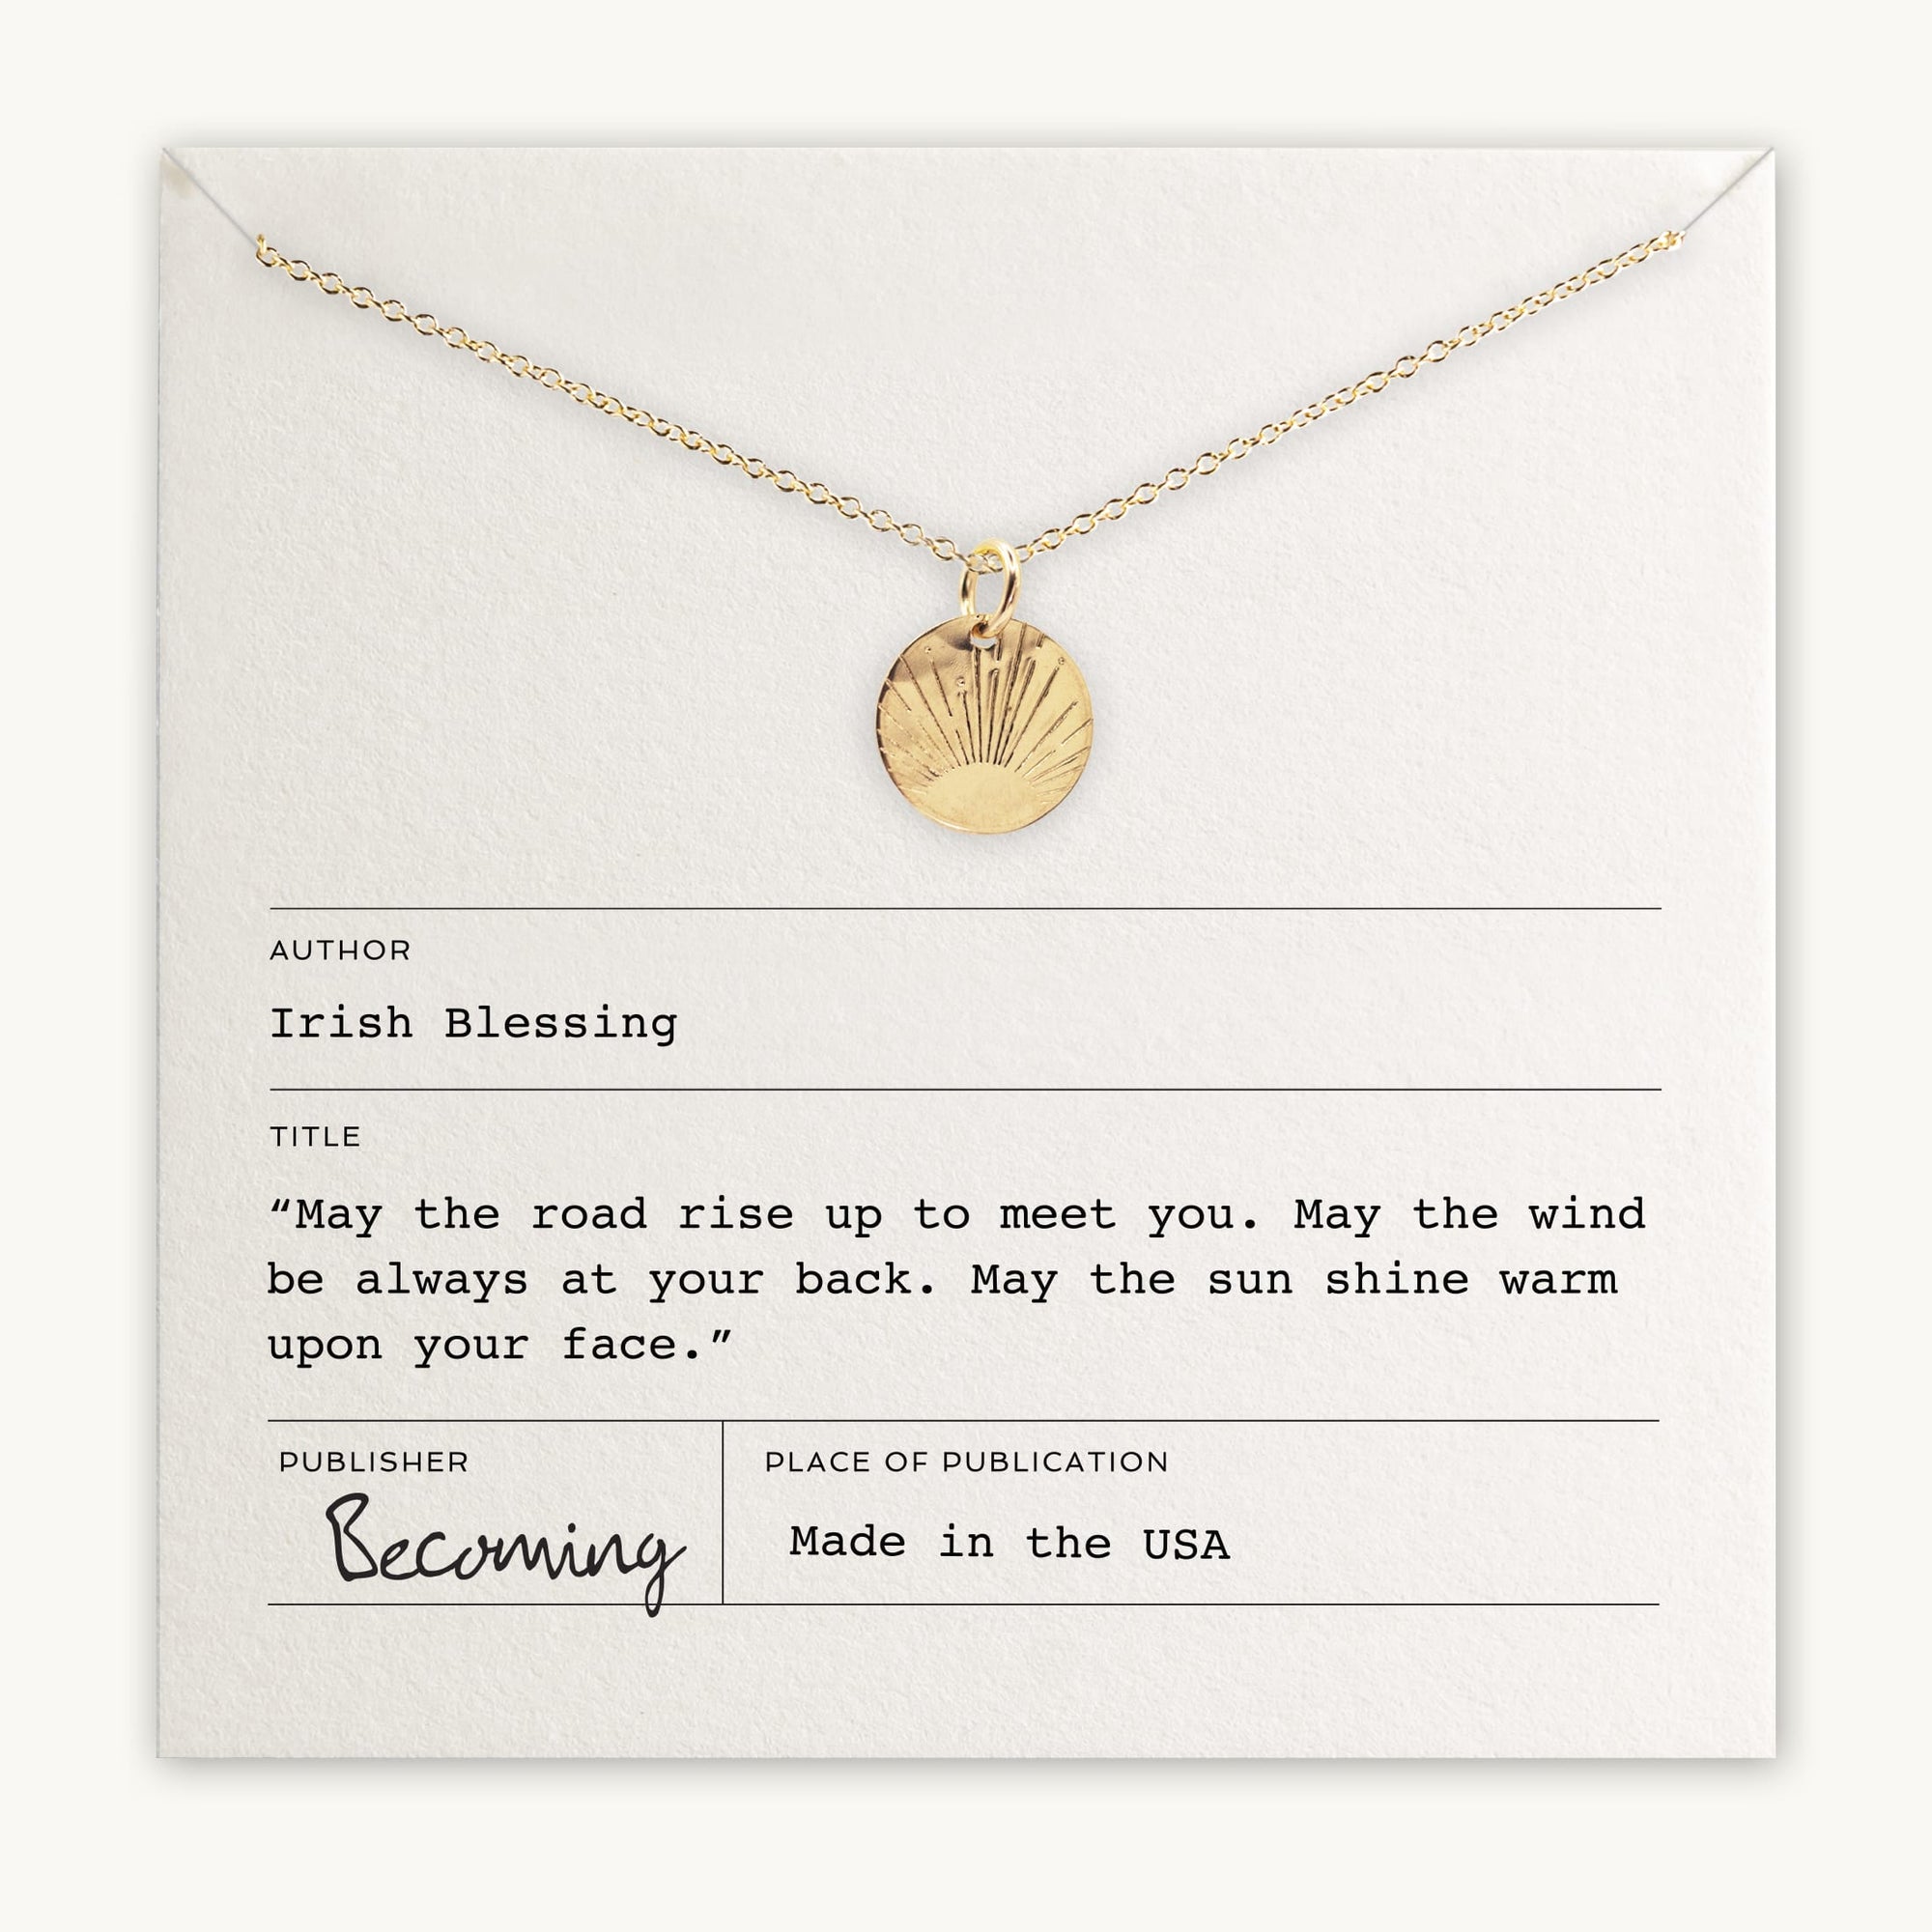 Becoming Jewelry&#39;s Irish Blessing Necklace, featuring a round pendant with a shell design, displayed on a card with an Irish blessing quote.